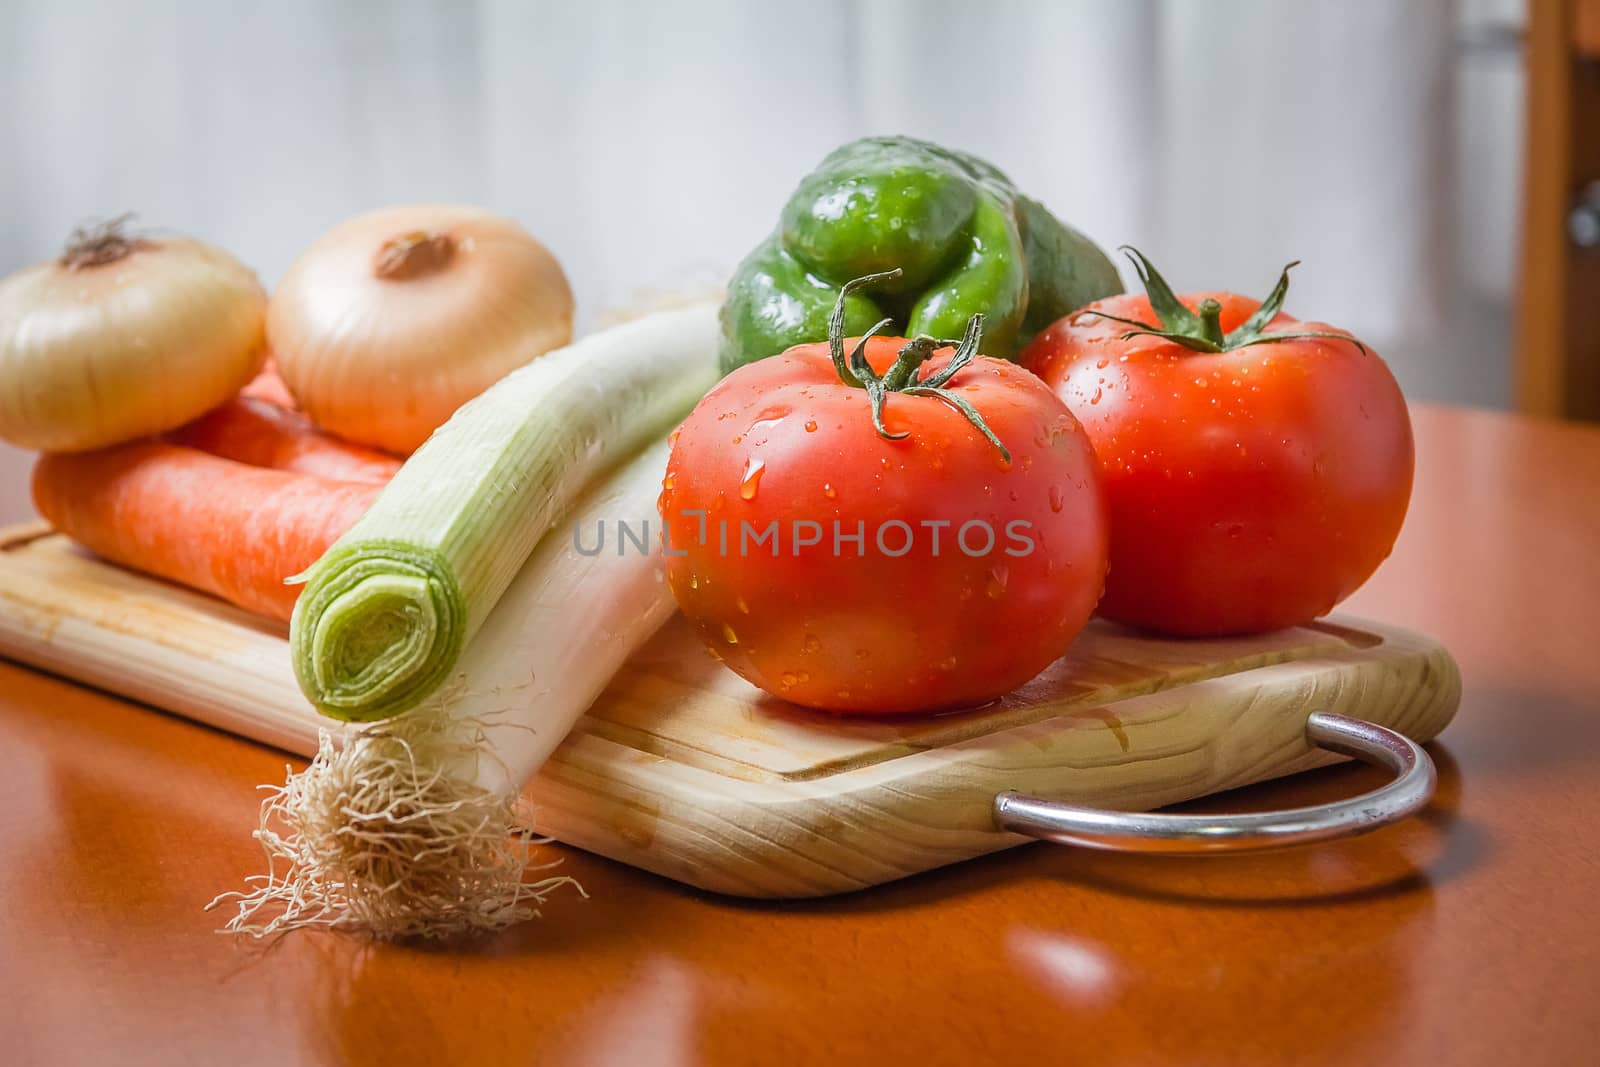 Fresh vegetables on cutting board in a wooden kitchen table